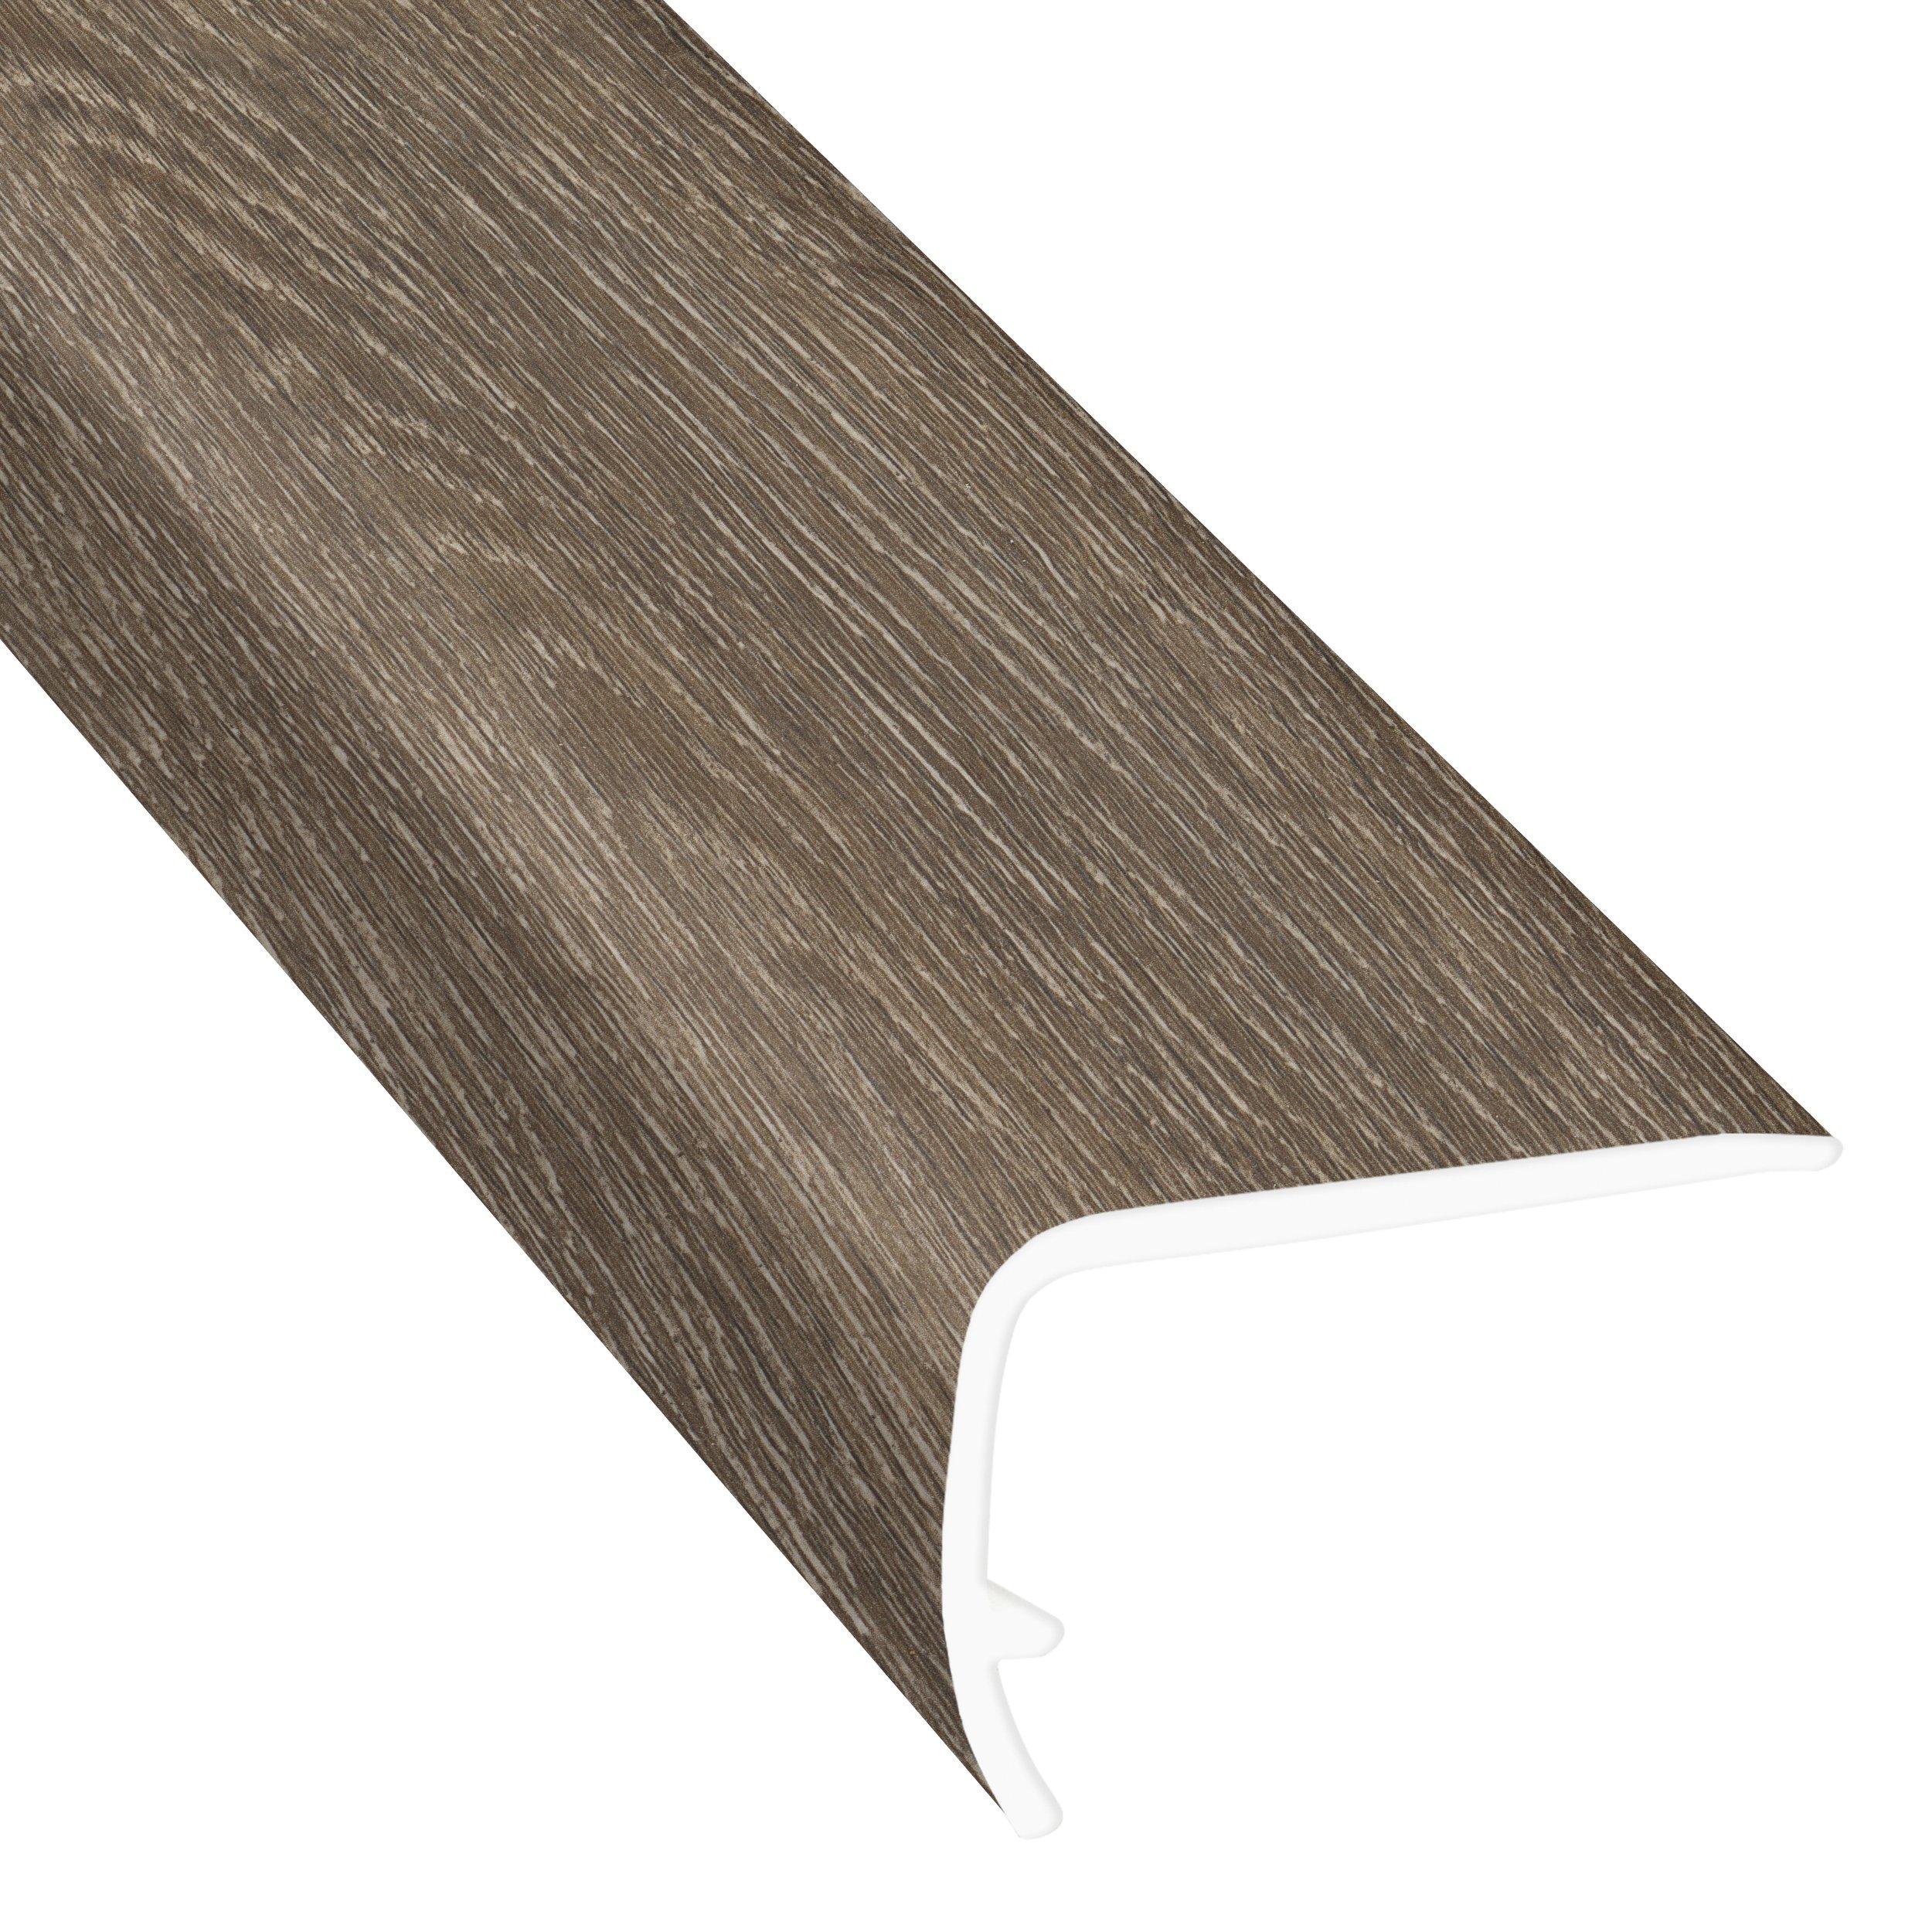 Saddlebrook 94in. Vinyl Overlapping Stair Nose